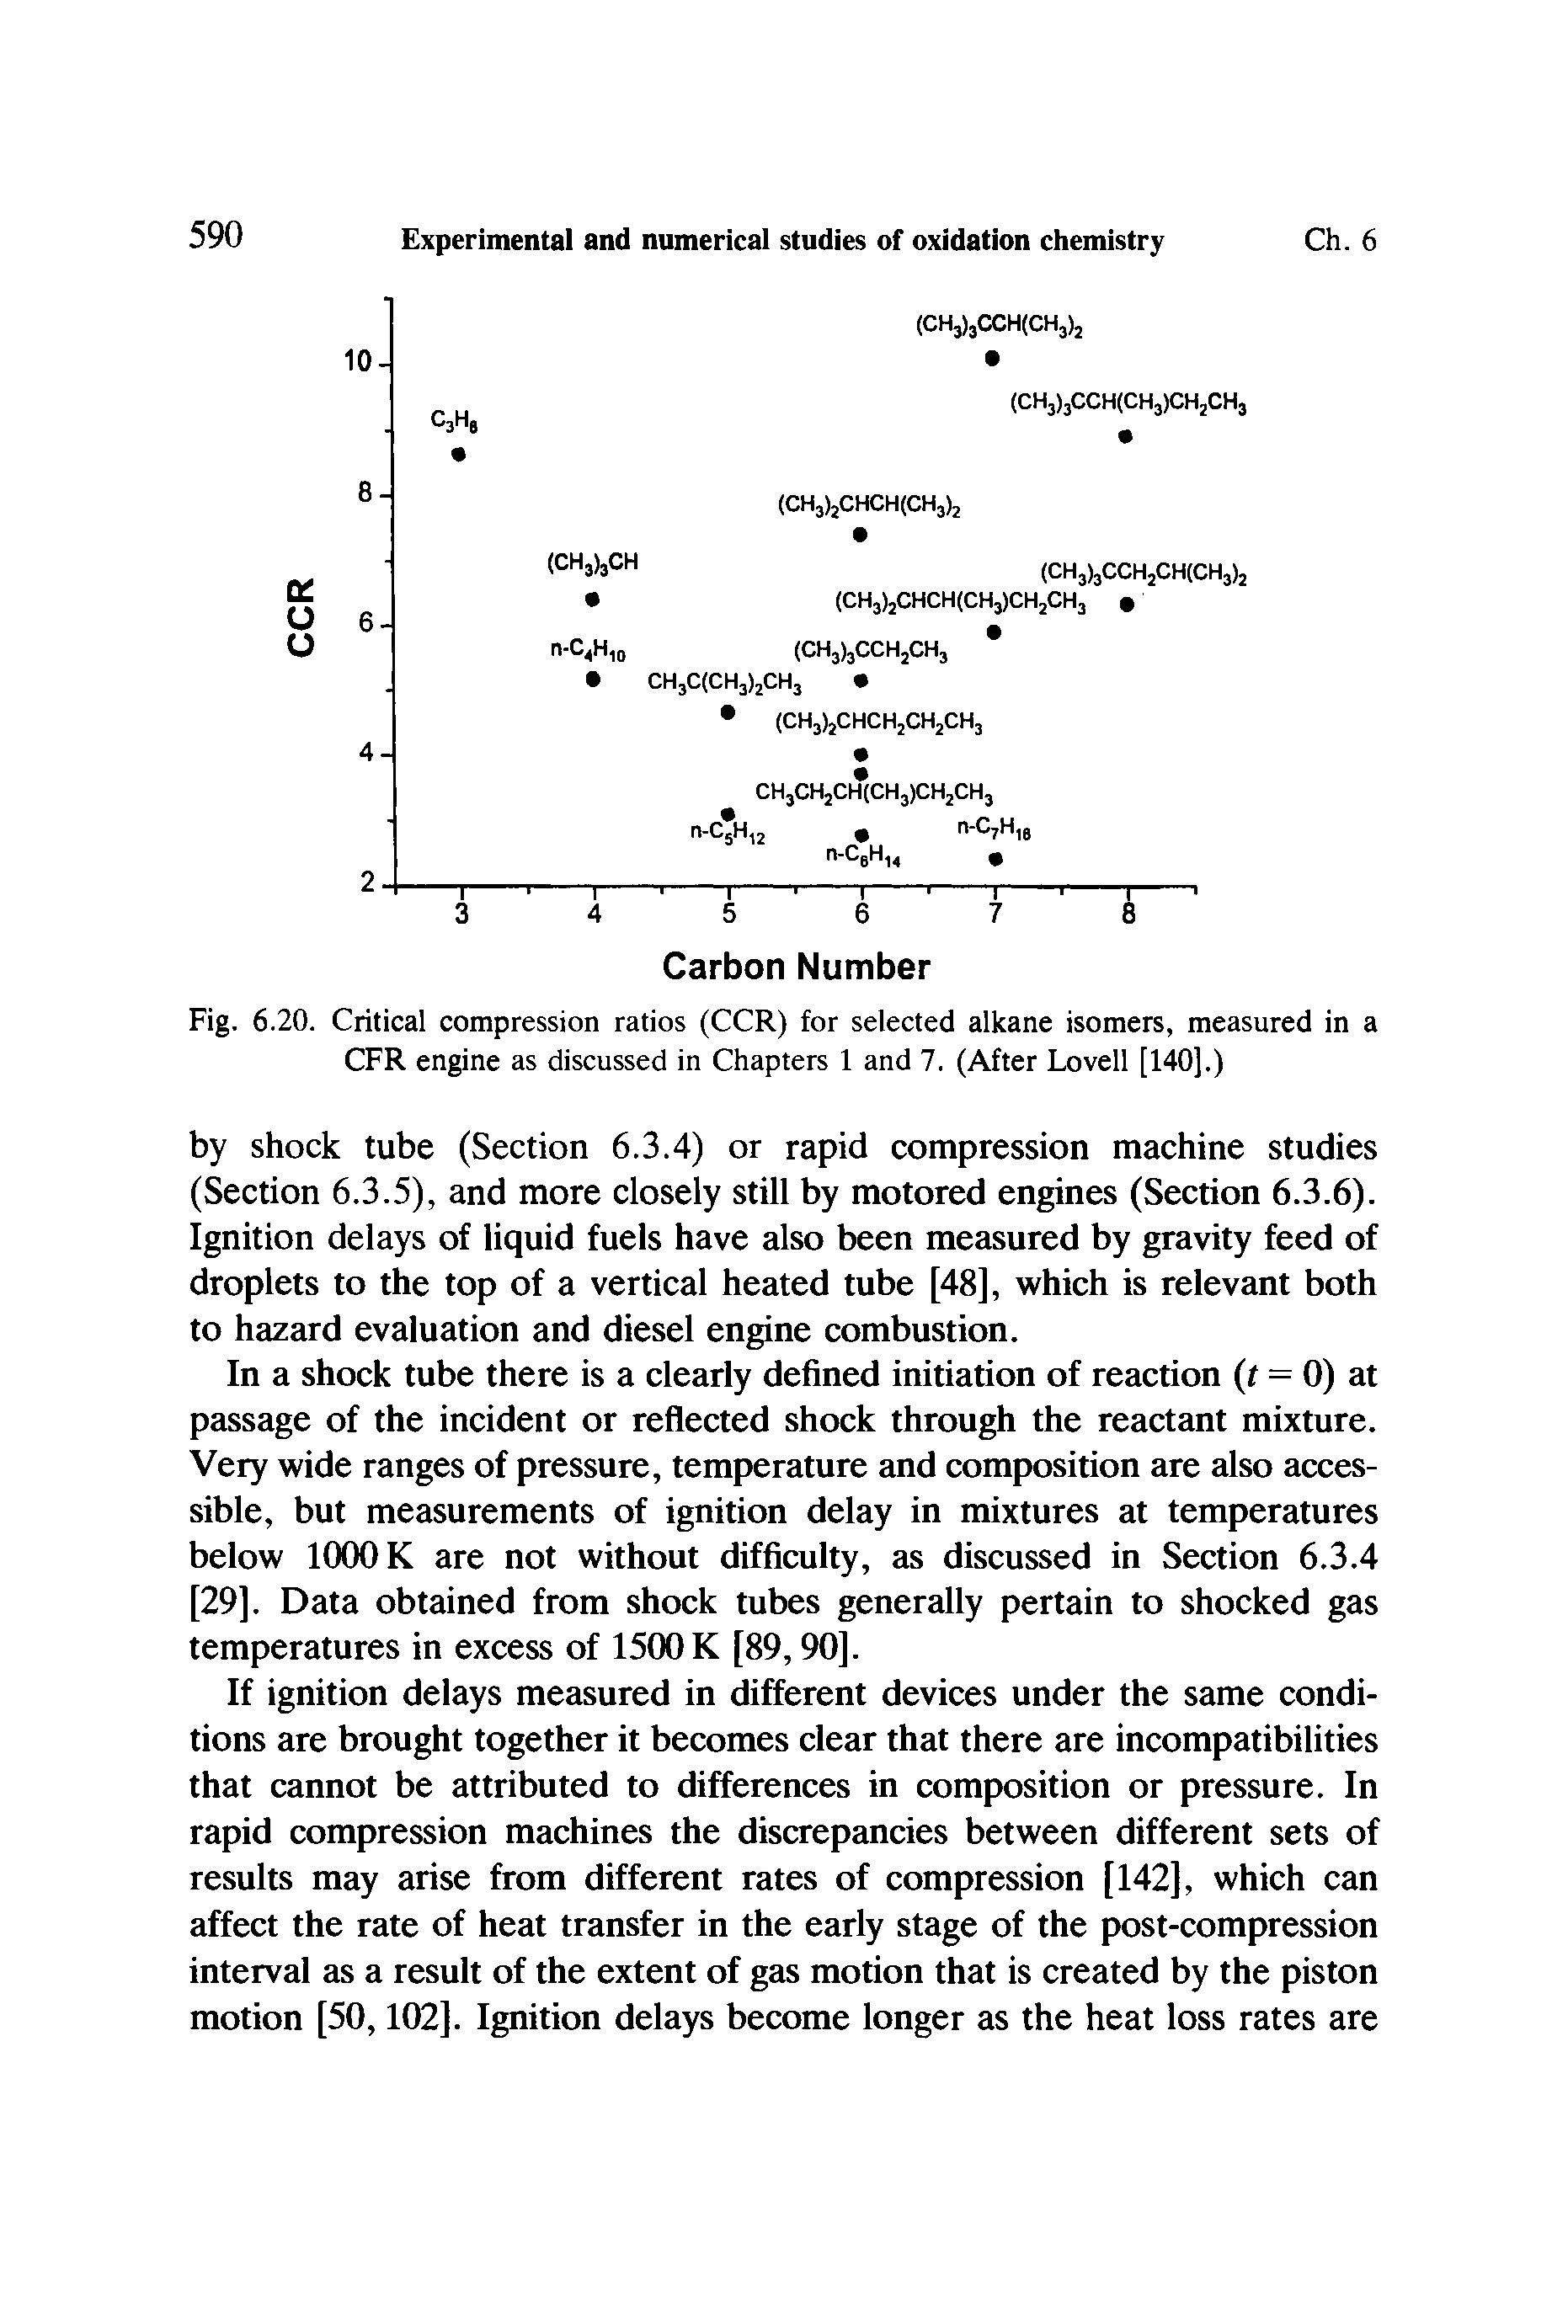 Fig. 6.20. Critical compression ratios (CCR) for selected alkane isomers, measured in a CFR engine as discussed in Chapters 1 and 7. (After Lovell [140].)...